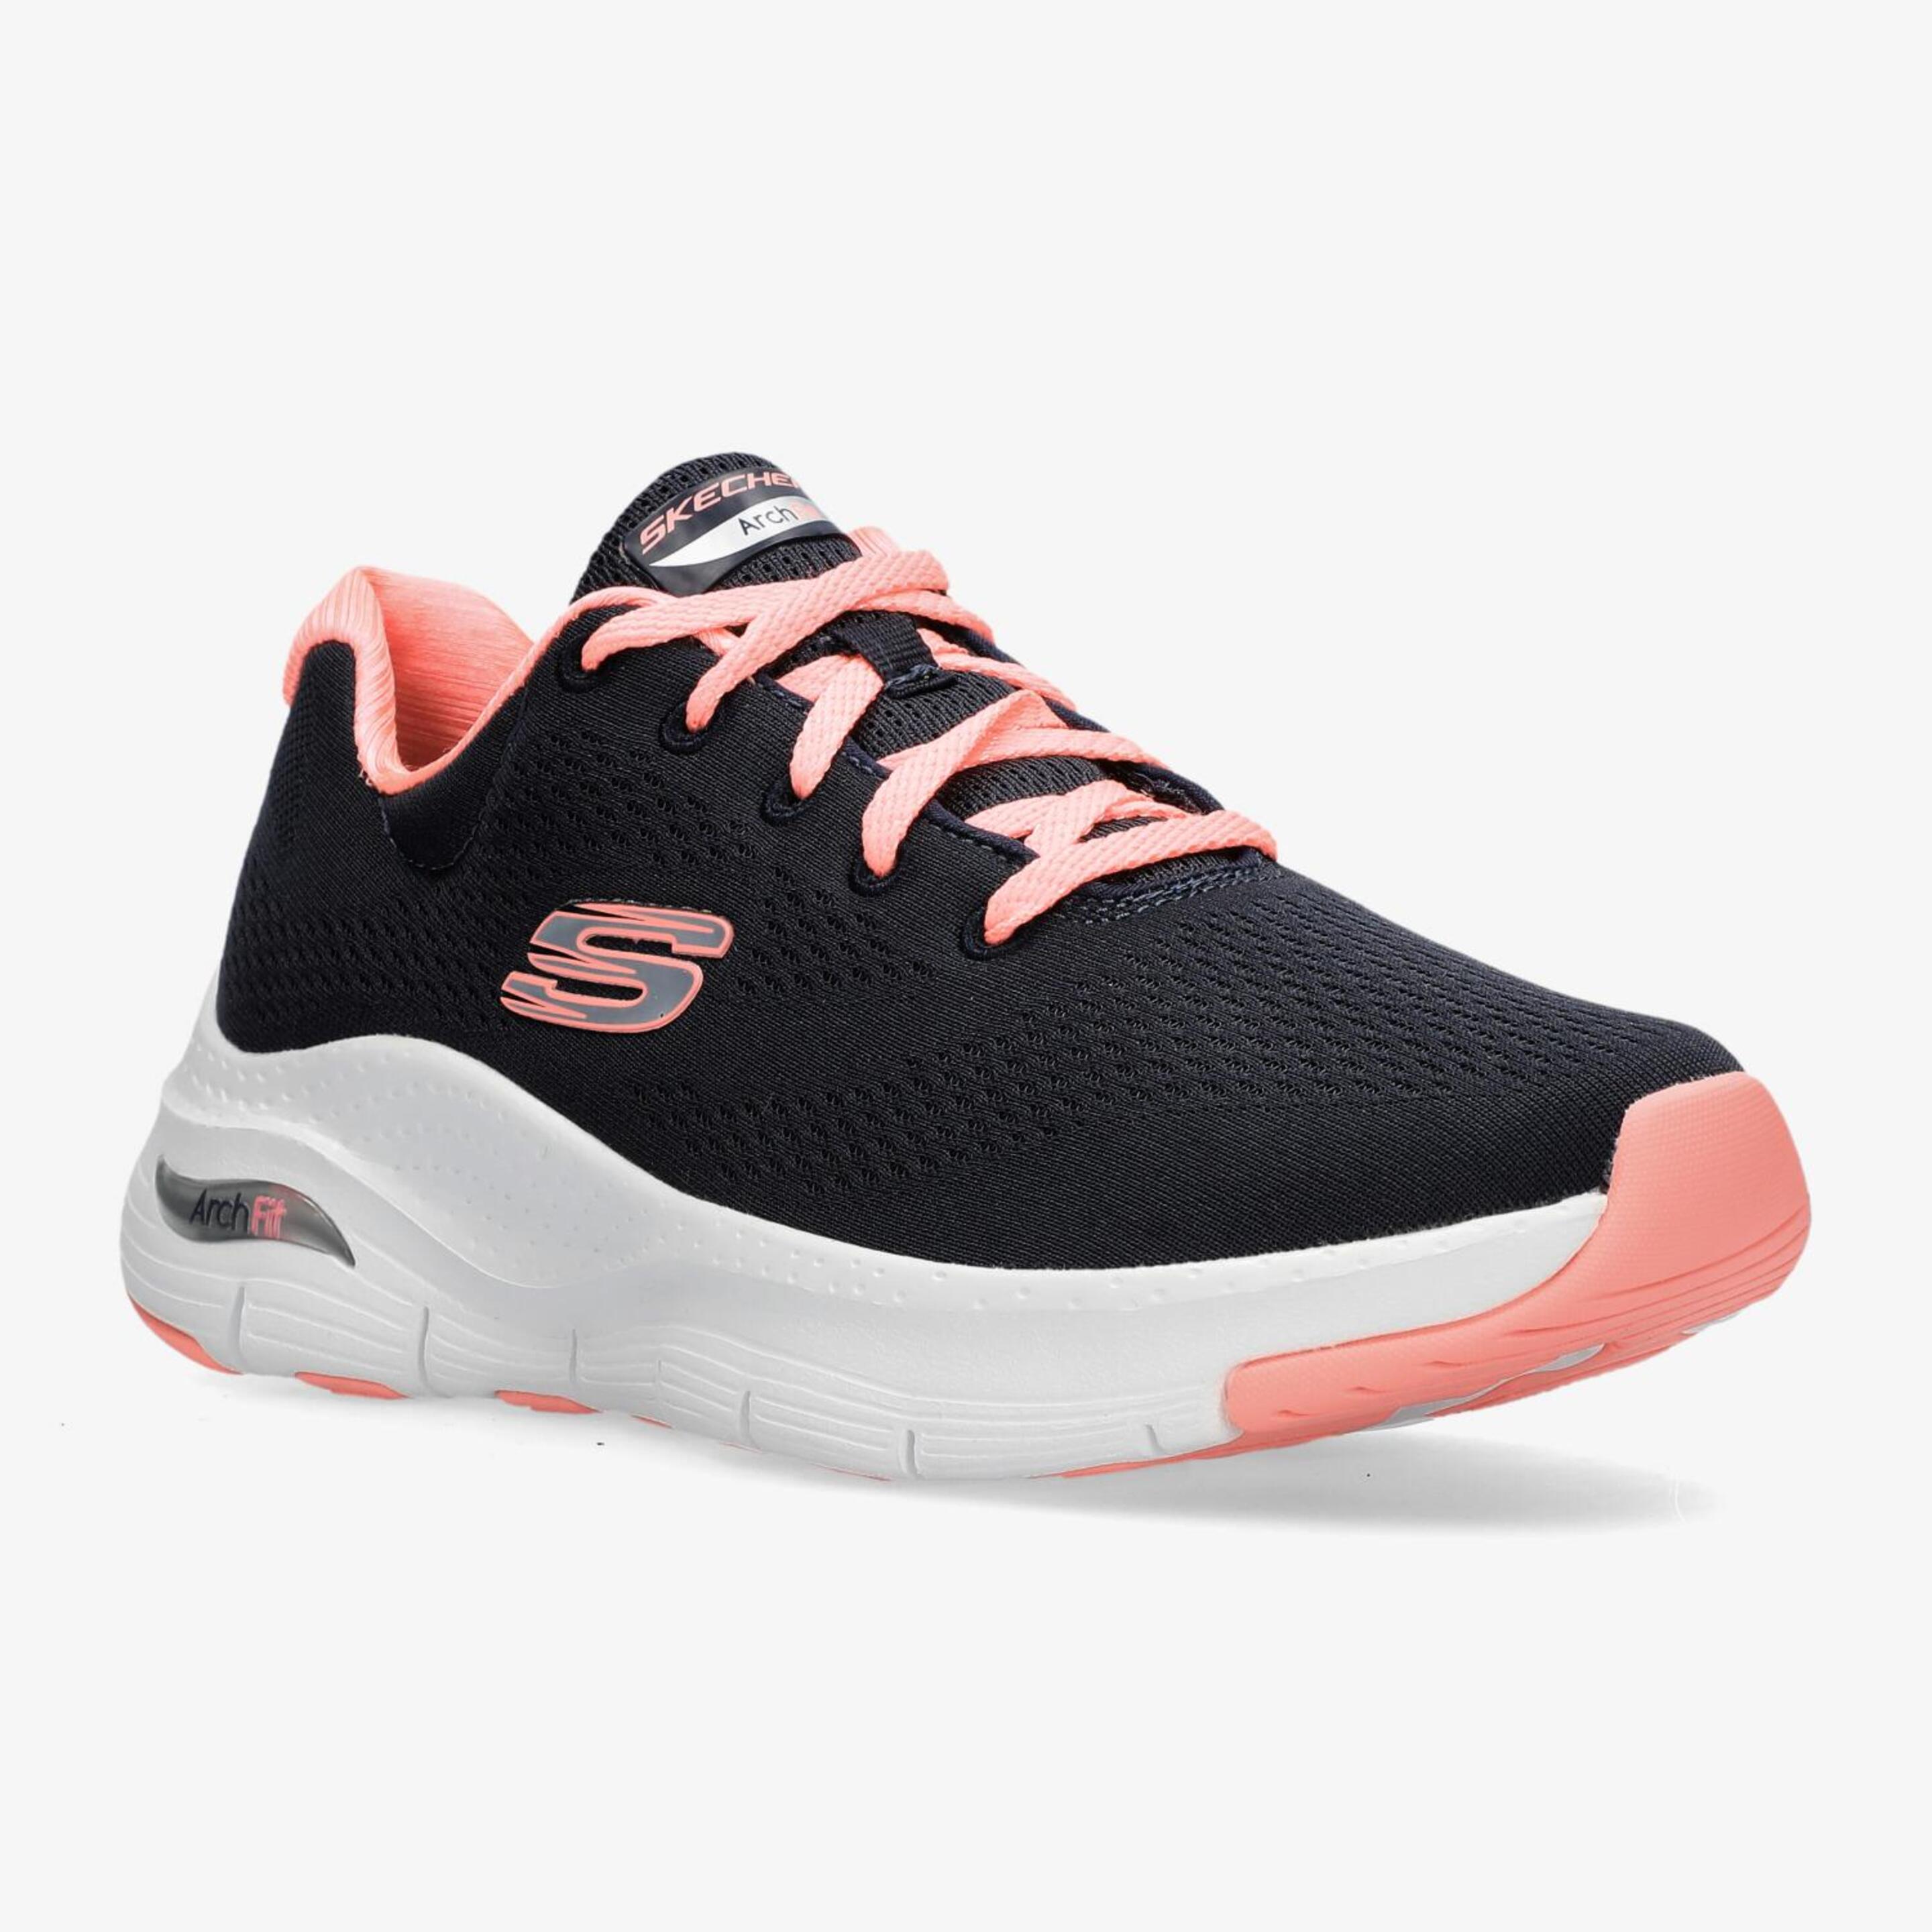 Skechers Arch Fit  - Azul - Sapatilhas Running Mulher | Sport Zone MKP